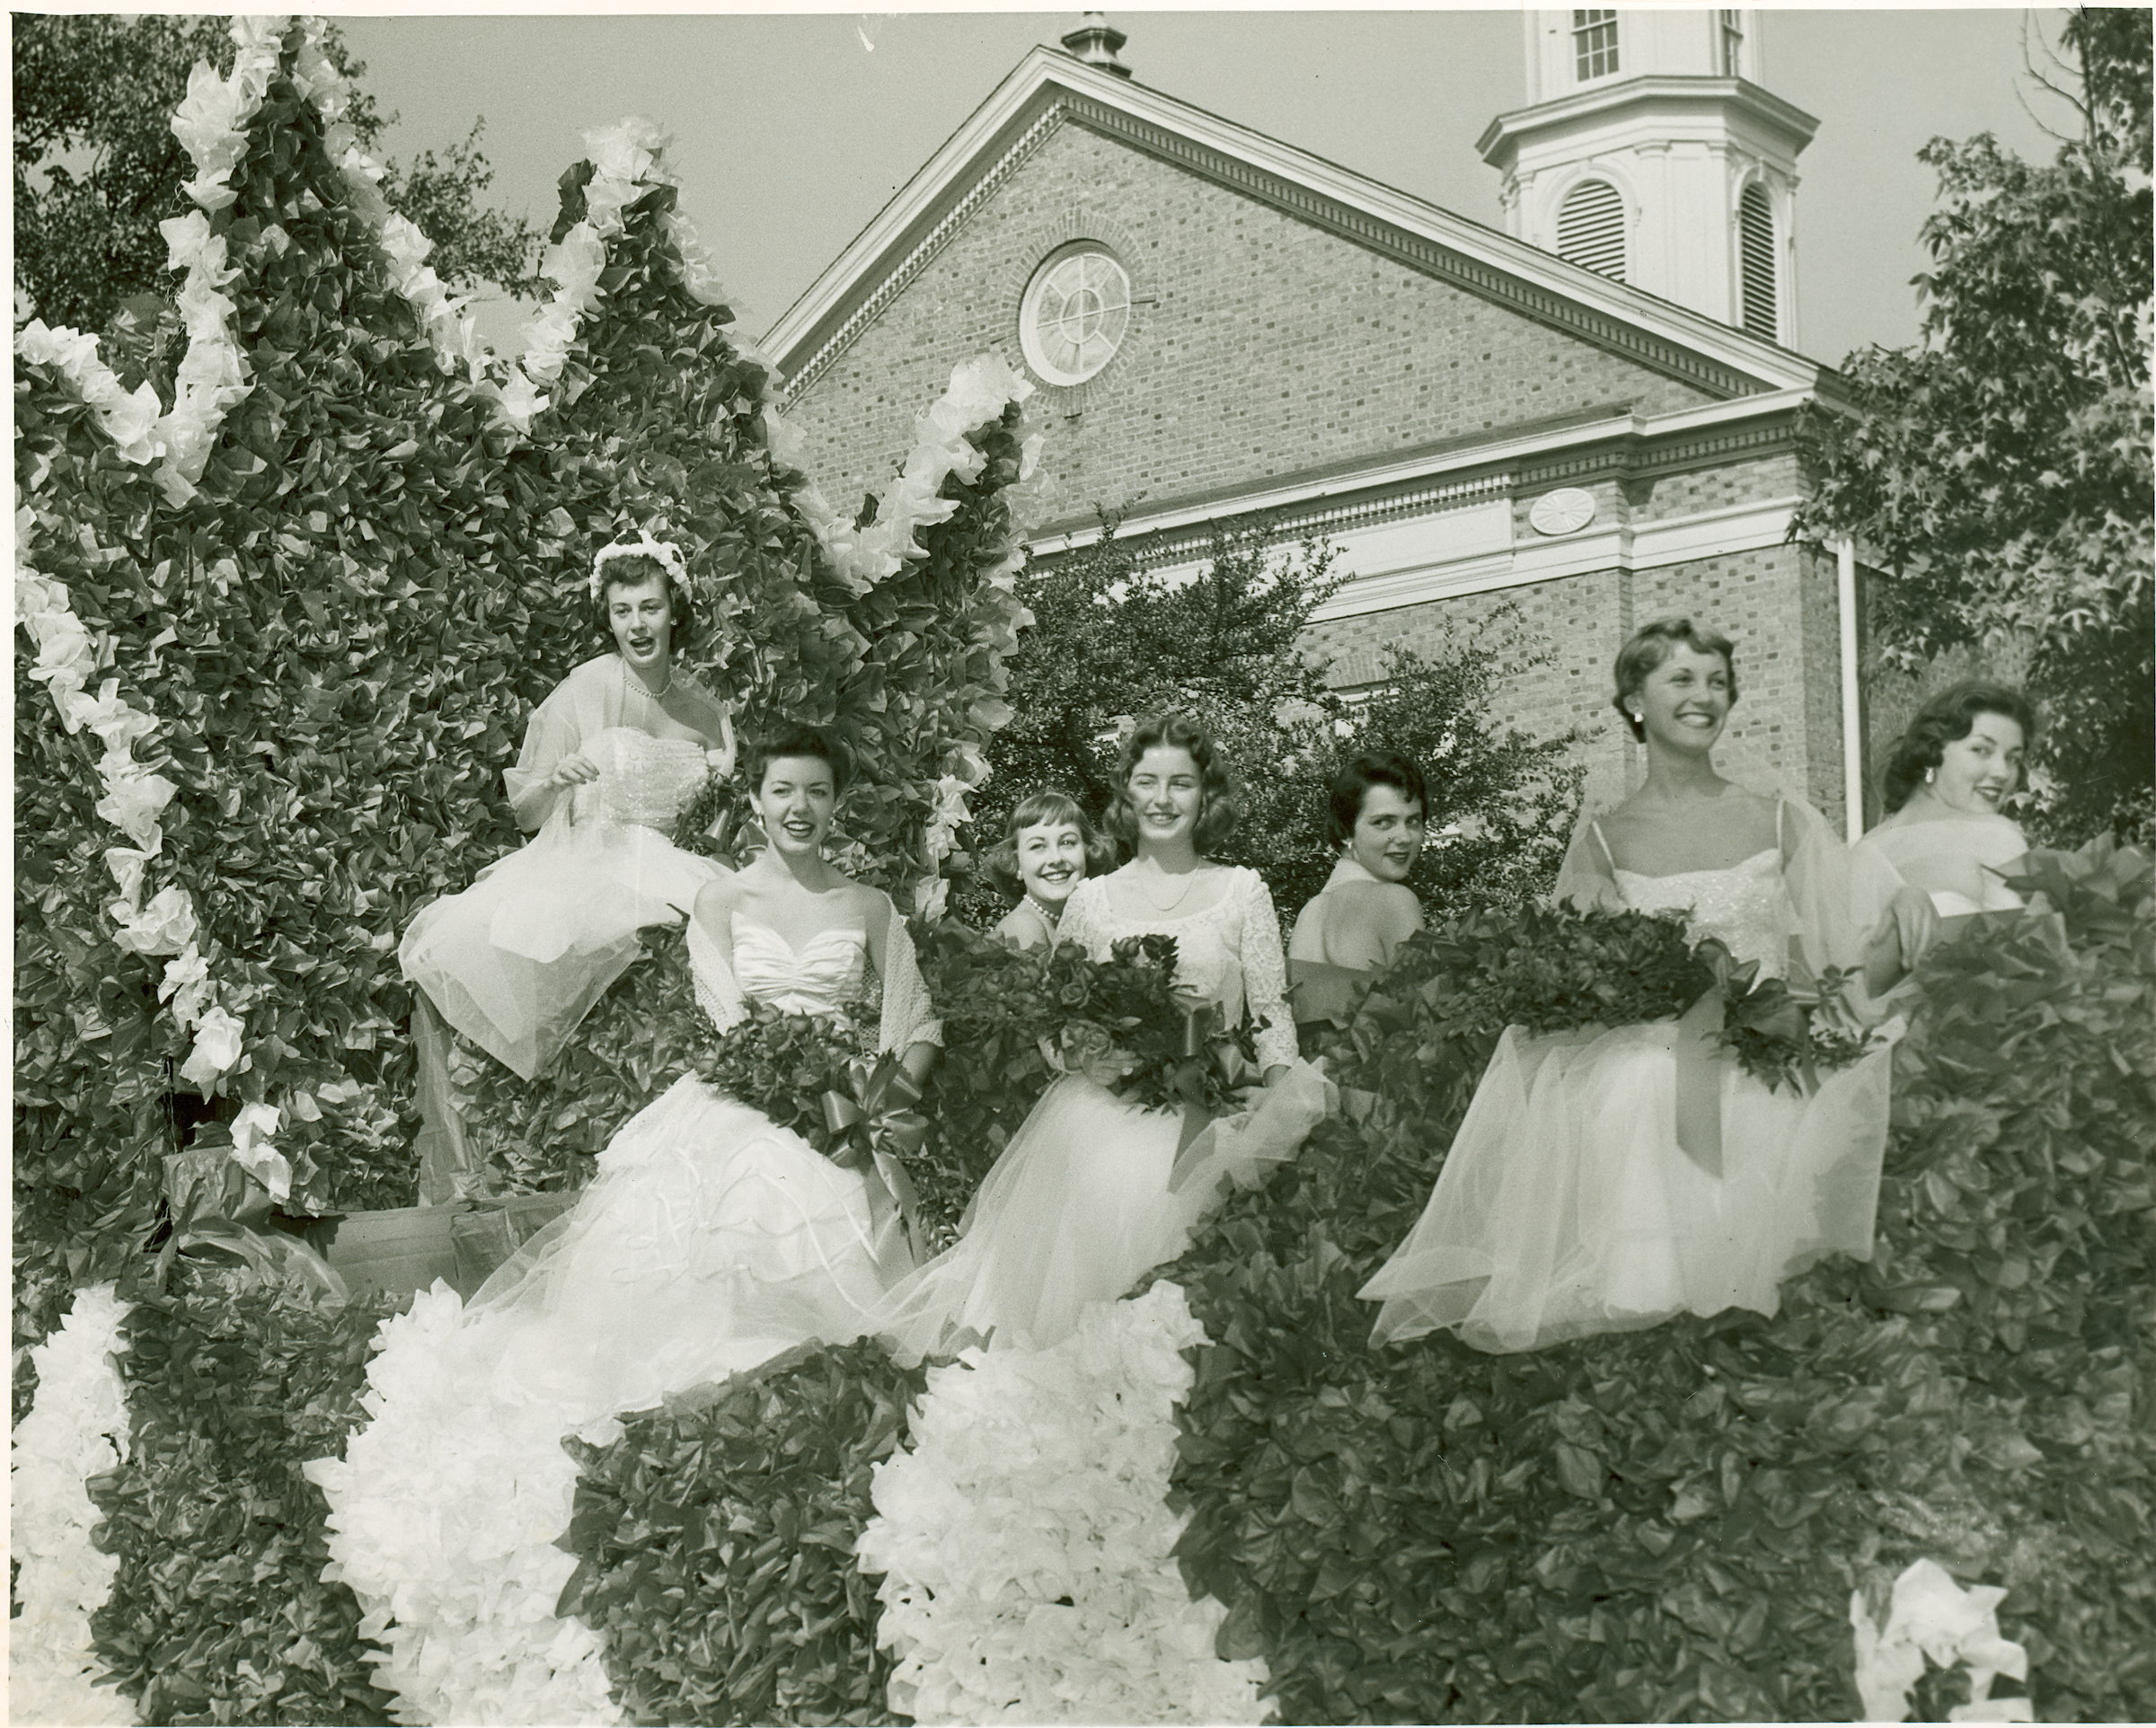 1952 Homecoming Queen Dorothy Bailey Sazio ’53, M.Ed. ’68 and attendants riding on a parade float.